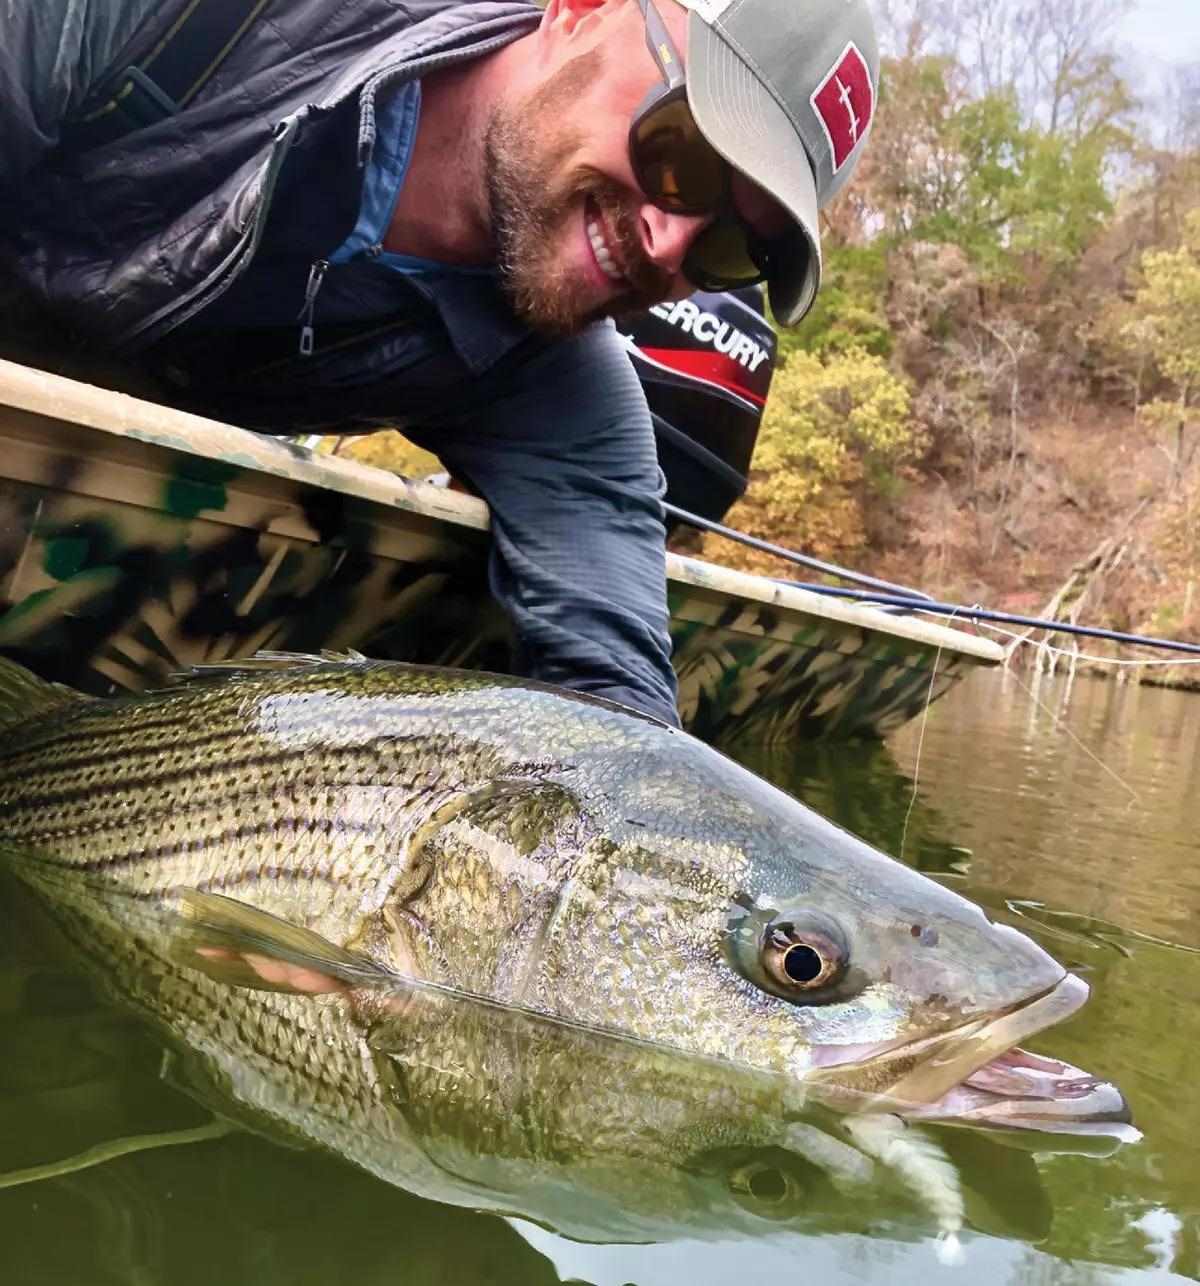 Blane Chocklett's Guide to Catching Landlocked Freshwater St - Fly